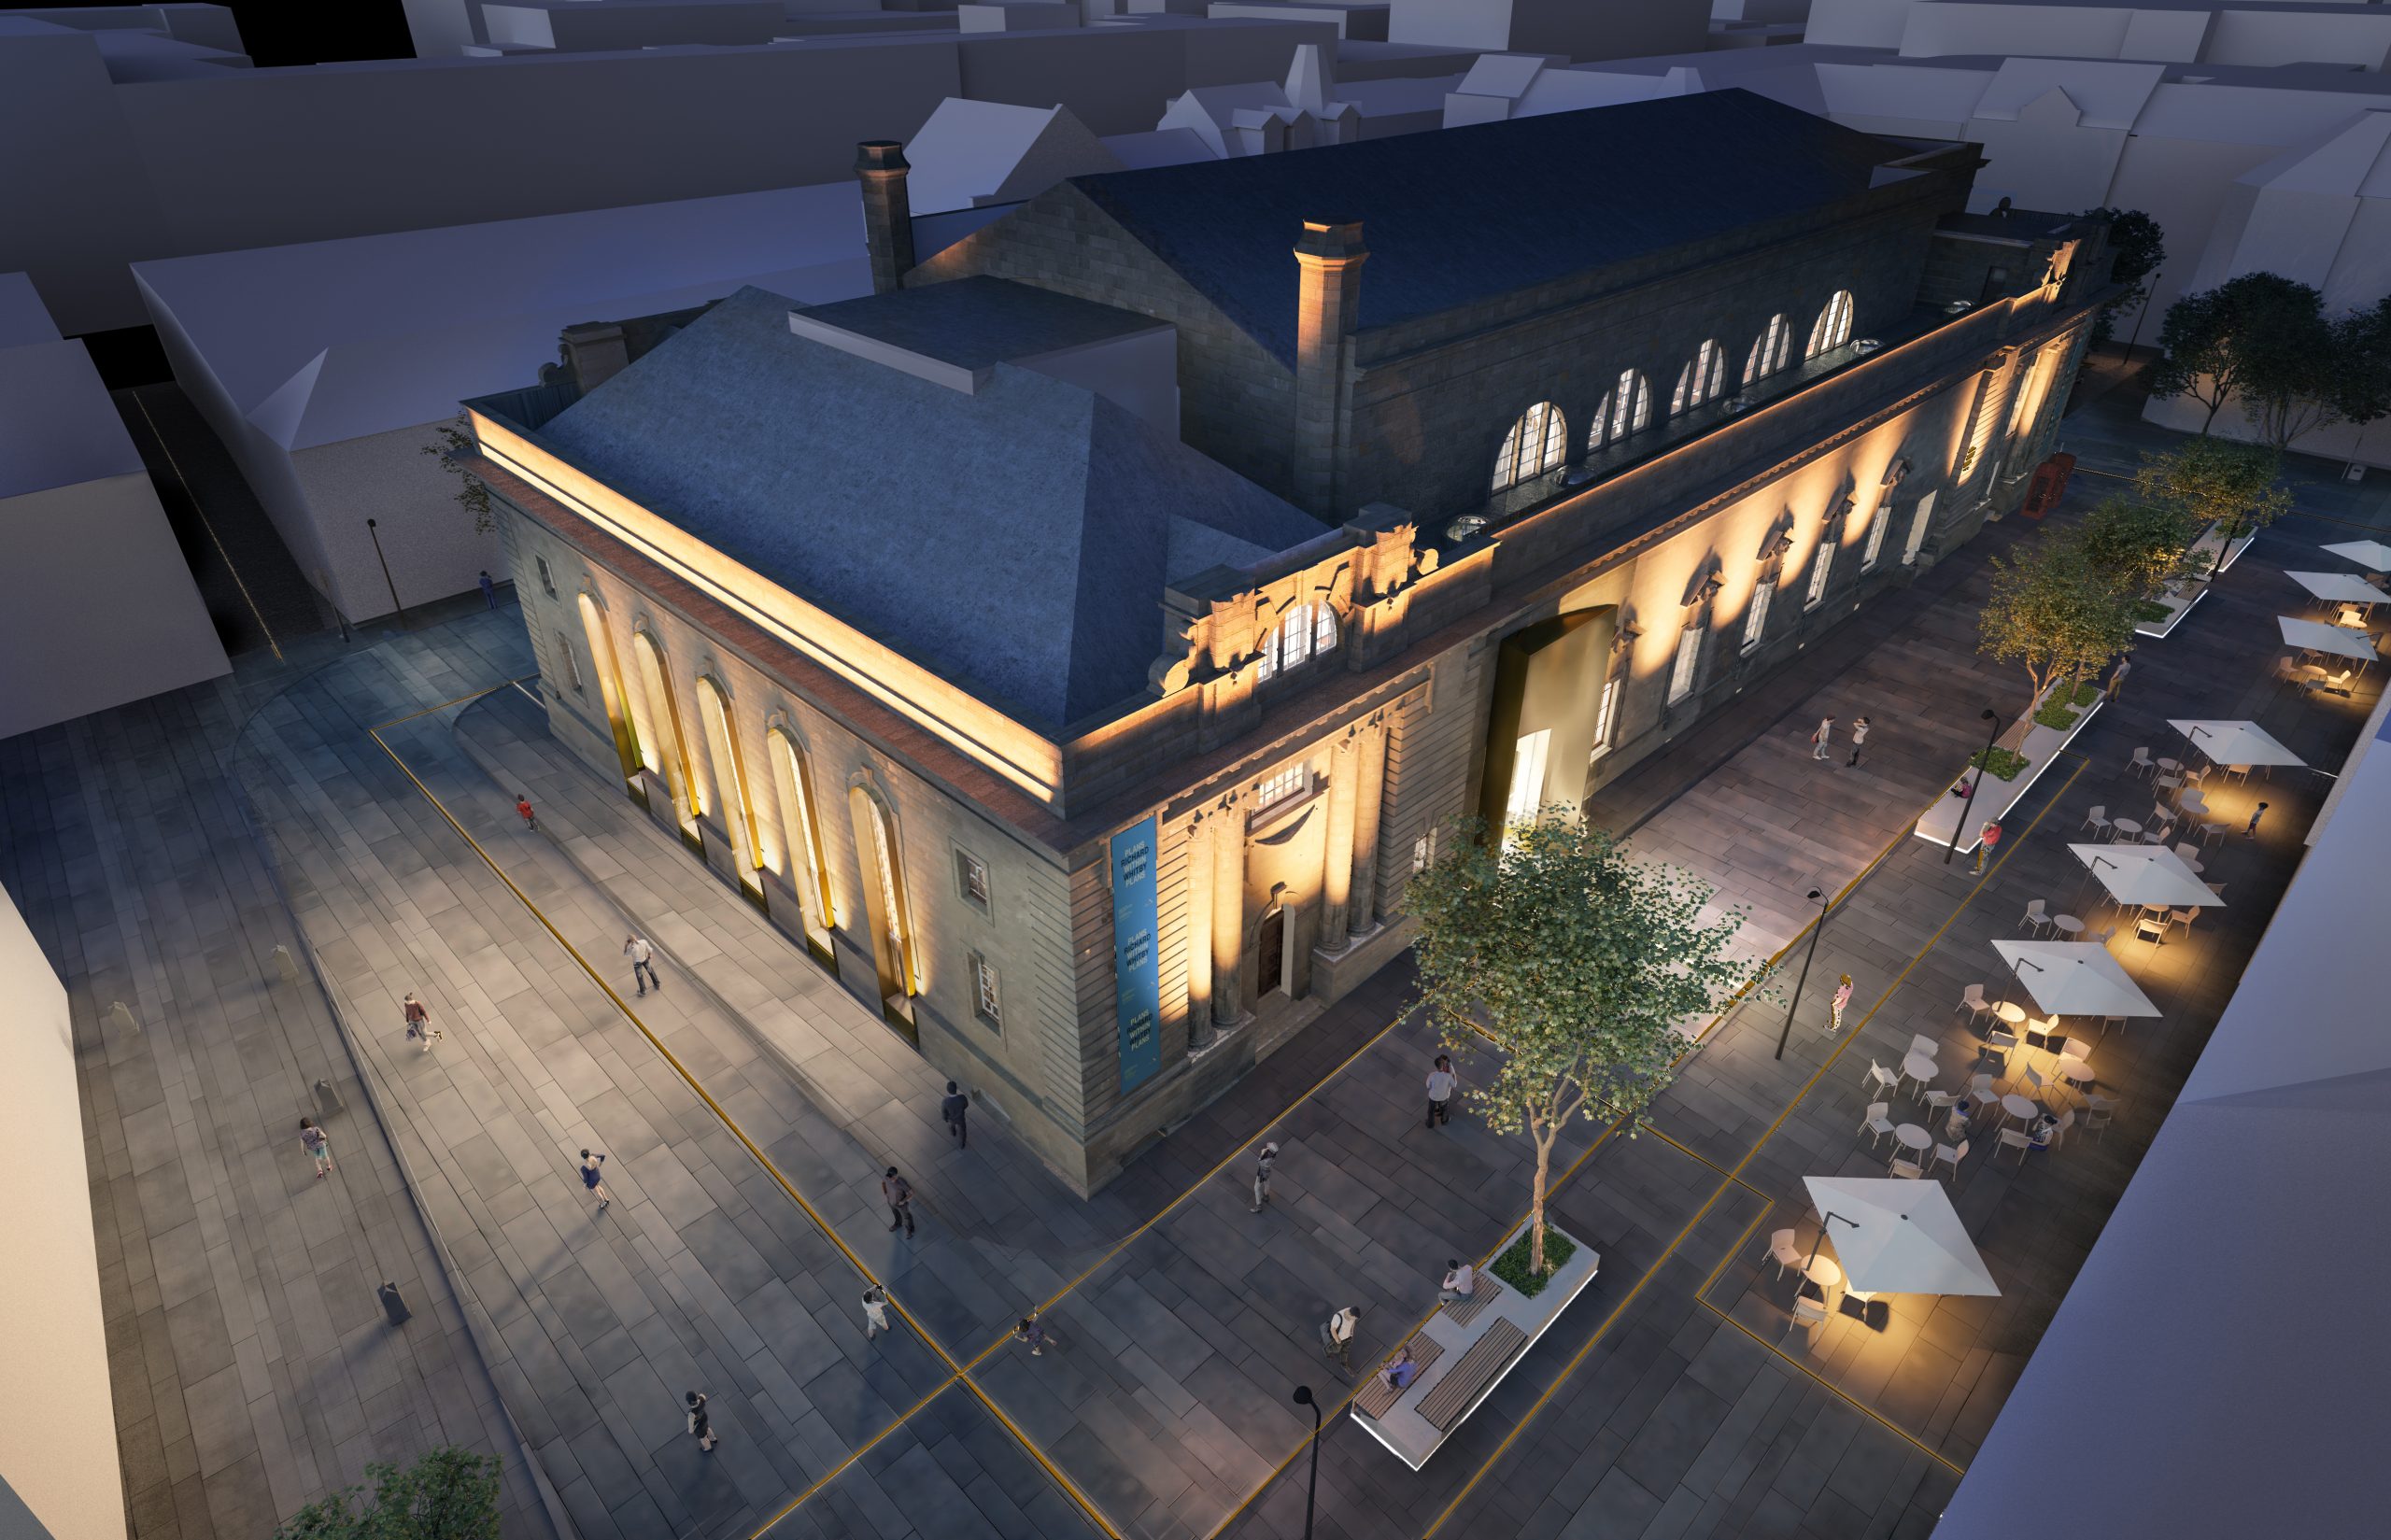 Artist's impression of completed Perth City Hall redevelopment